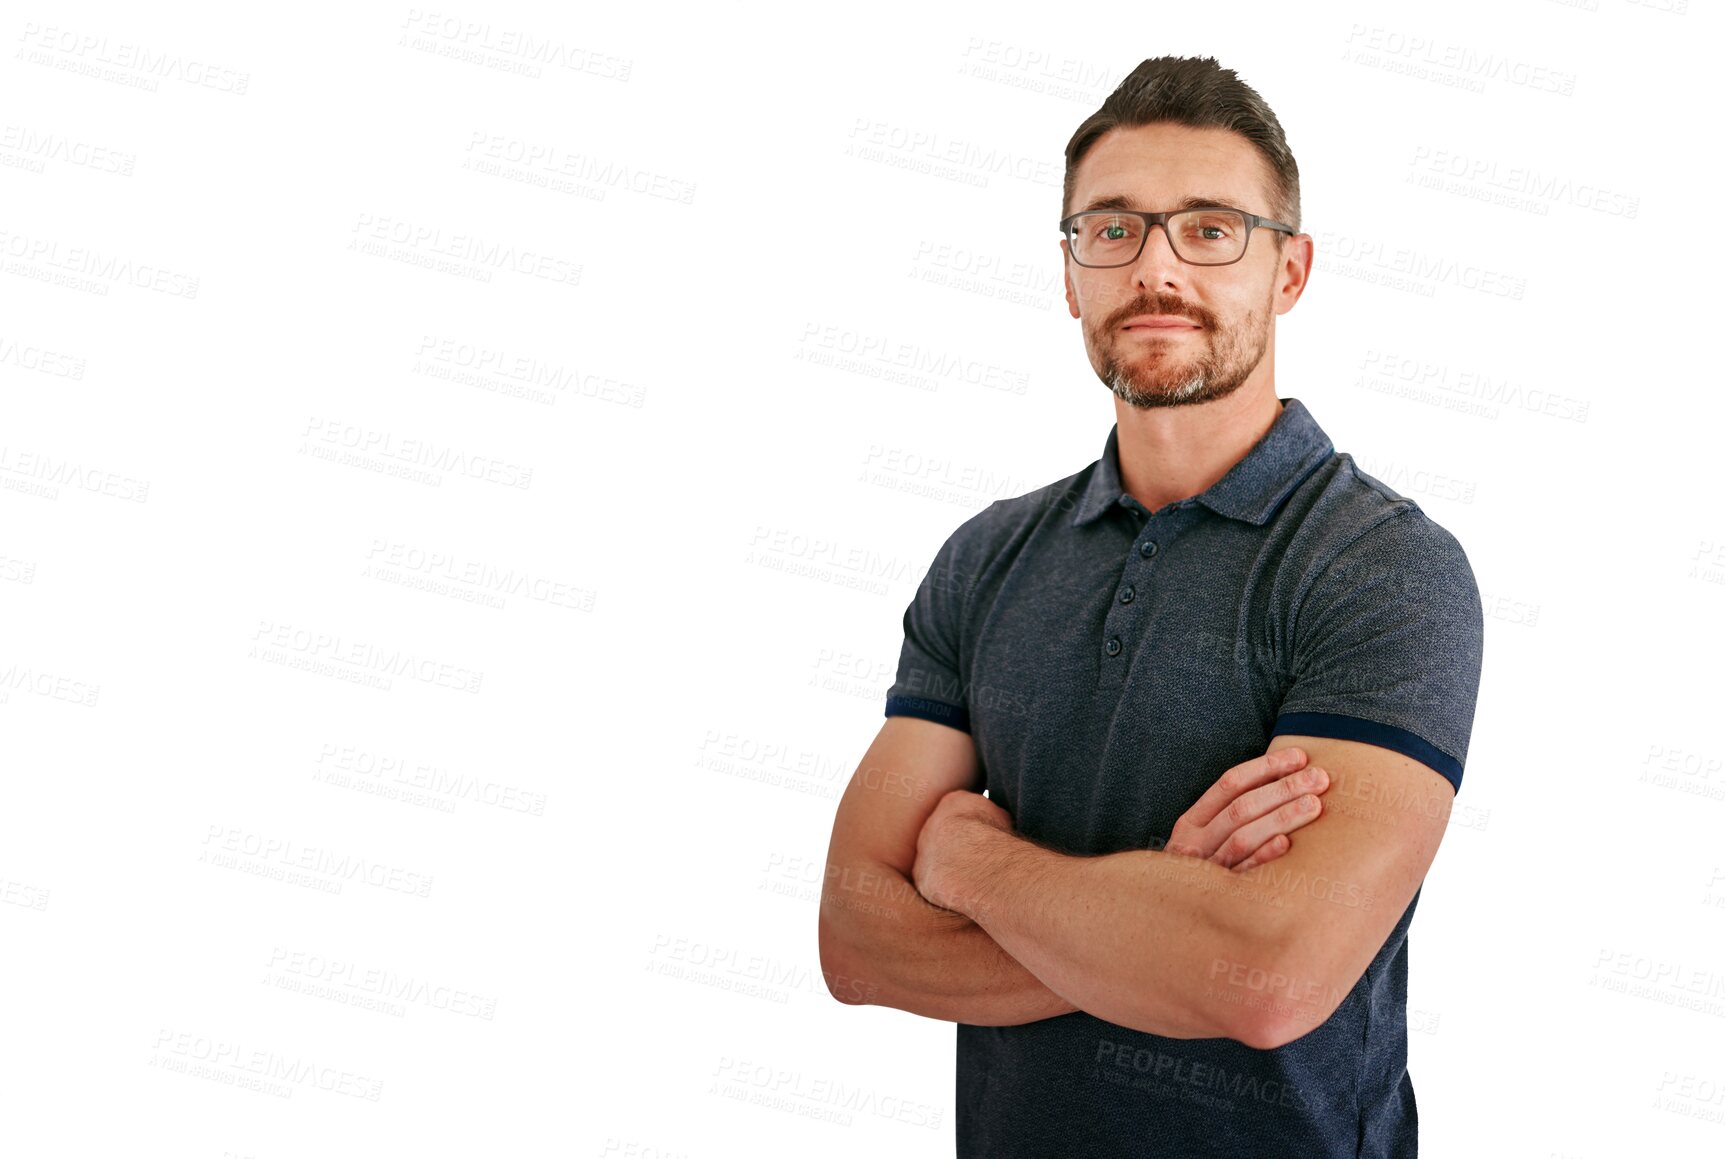 Buy stock photo Mature man, arms crossed and glasses in portrait, vision and confident with professional on png transparent background. Entrepreneur, pride and boss from Canada in eyewear, casual outfit and tshirt 